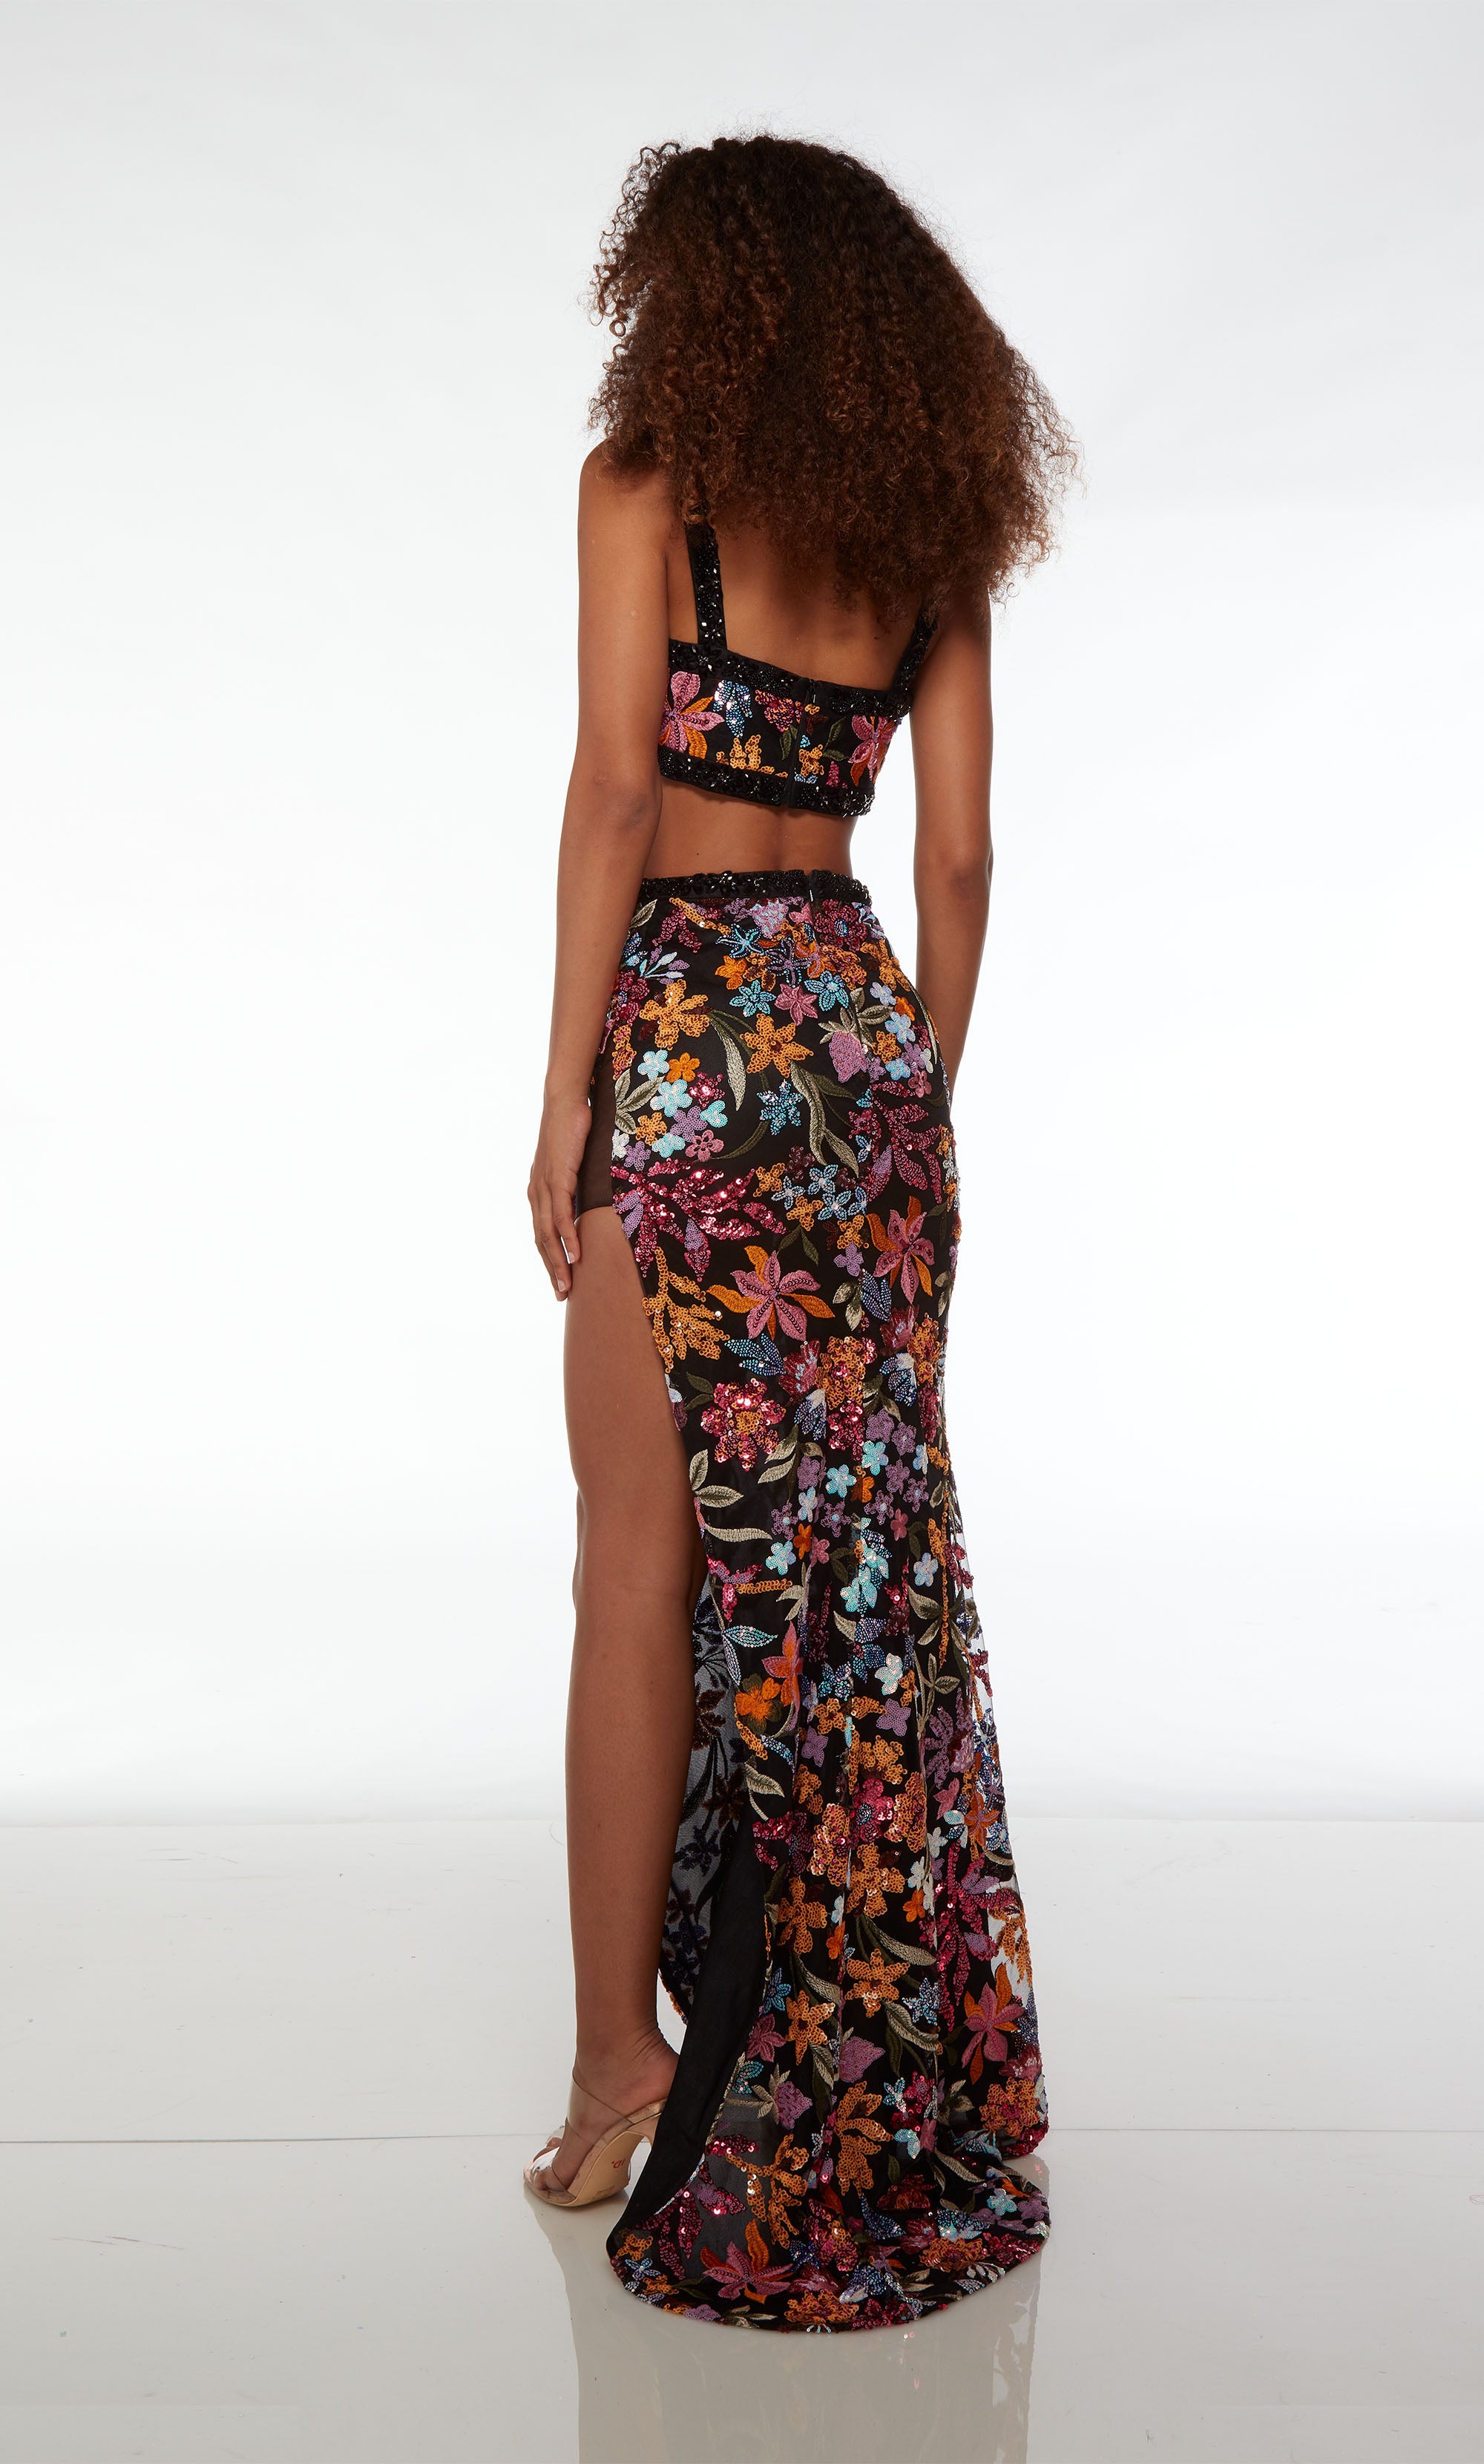 Gorgeous black two-piece dress: V-neck crop top and high-waisted skirt adorned with black rhinestone trim, high slit, slight train, and colorful sequined flowers.